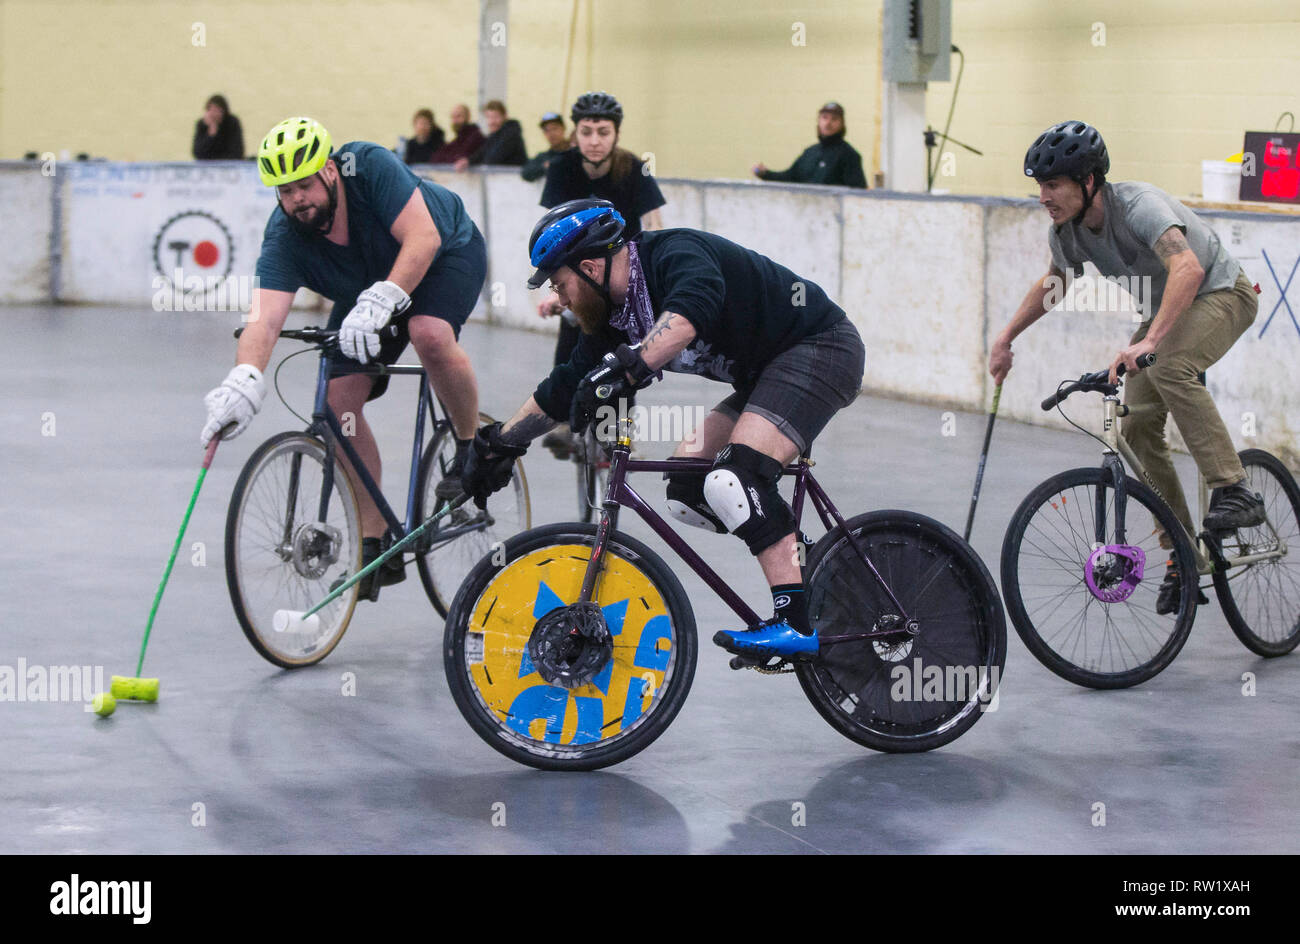 Toronto, Canada. 3rd Mar, 2019. Participants compete during the Great Lakes Winter Classic Bike Polo Tournament in Toronto, Canada, March 3, 2019. Bike Polo is a team sport combining the bicycle rider's skills with the fast-paced action of hockey. Credit: Zou Zheng/Xinhua/Alamy Live News Stock Photo